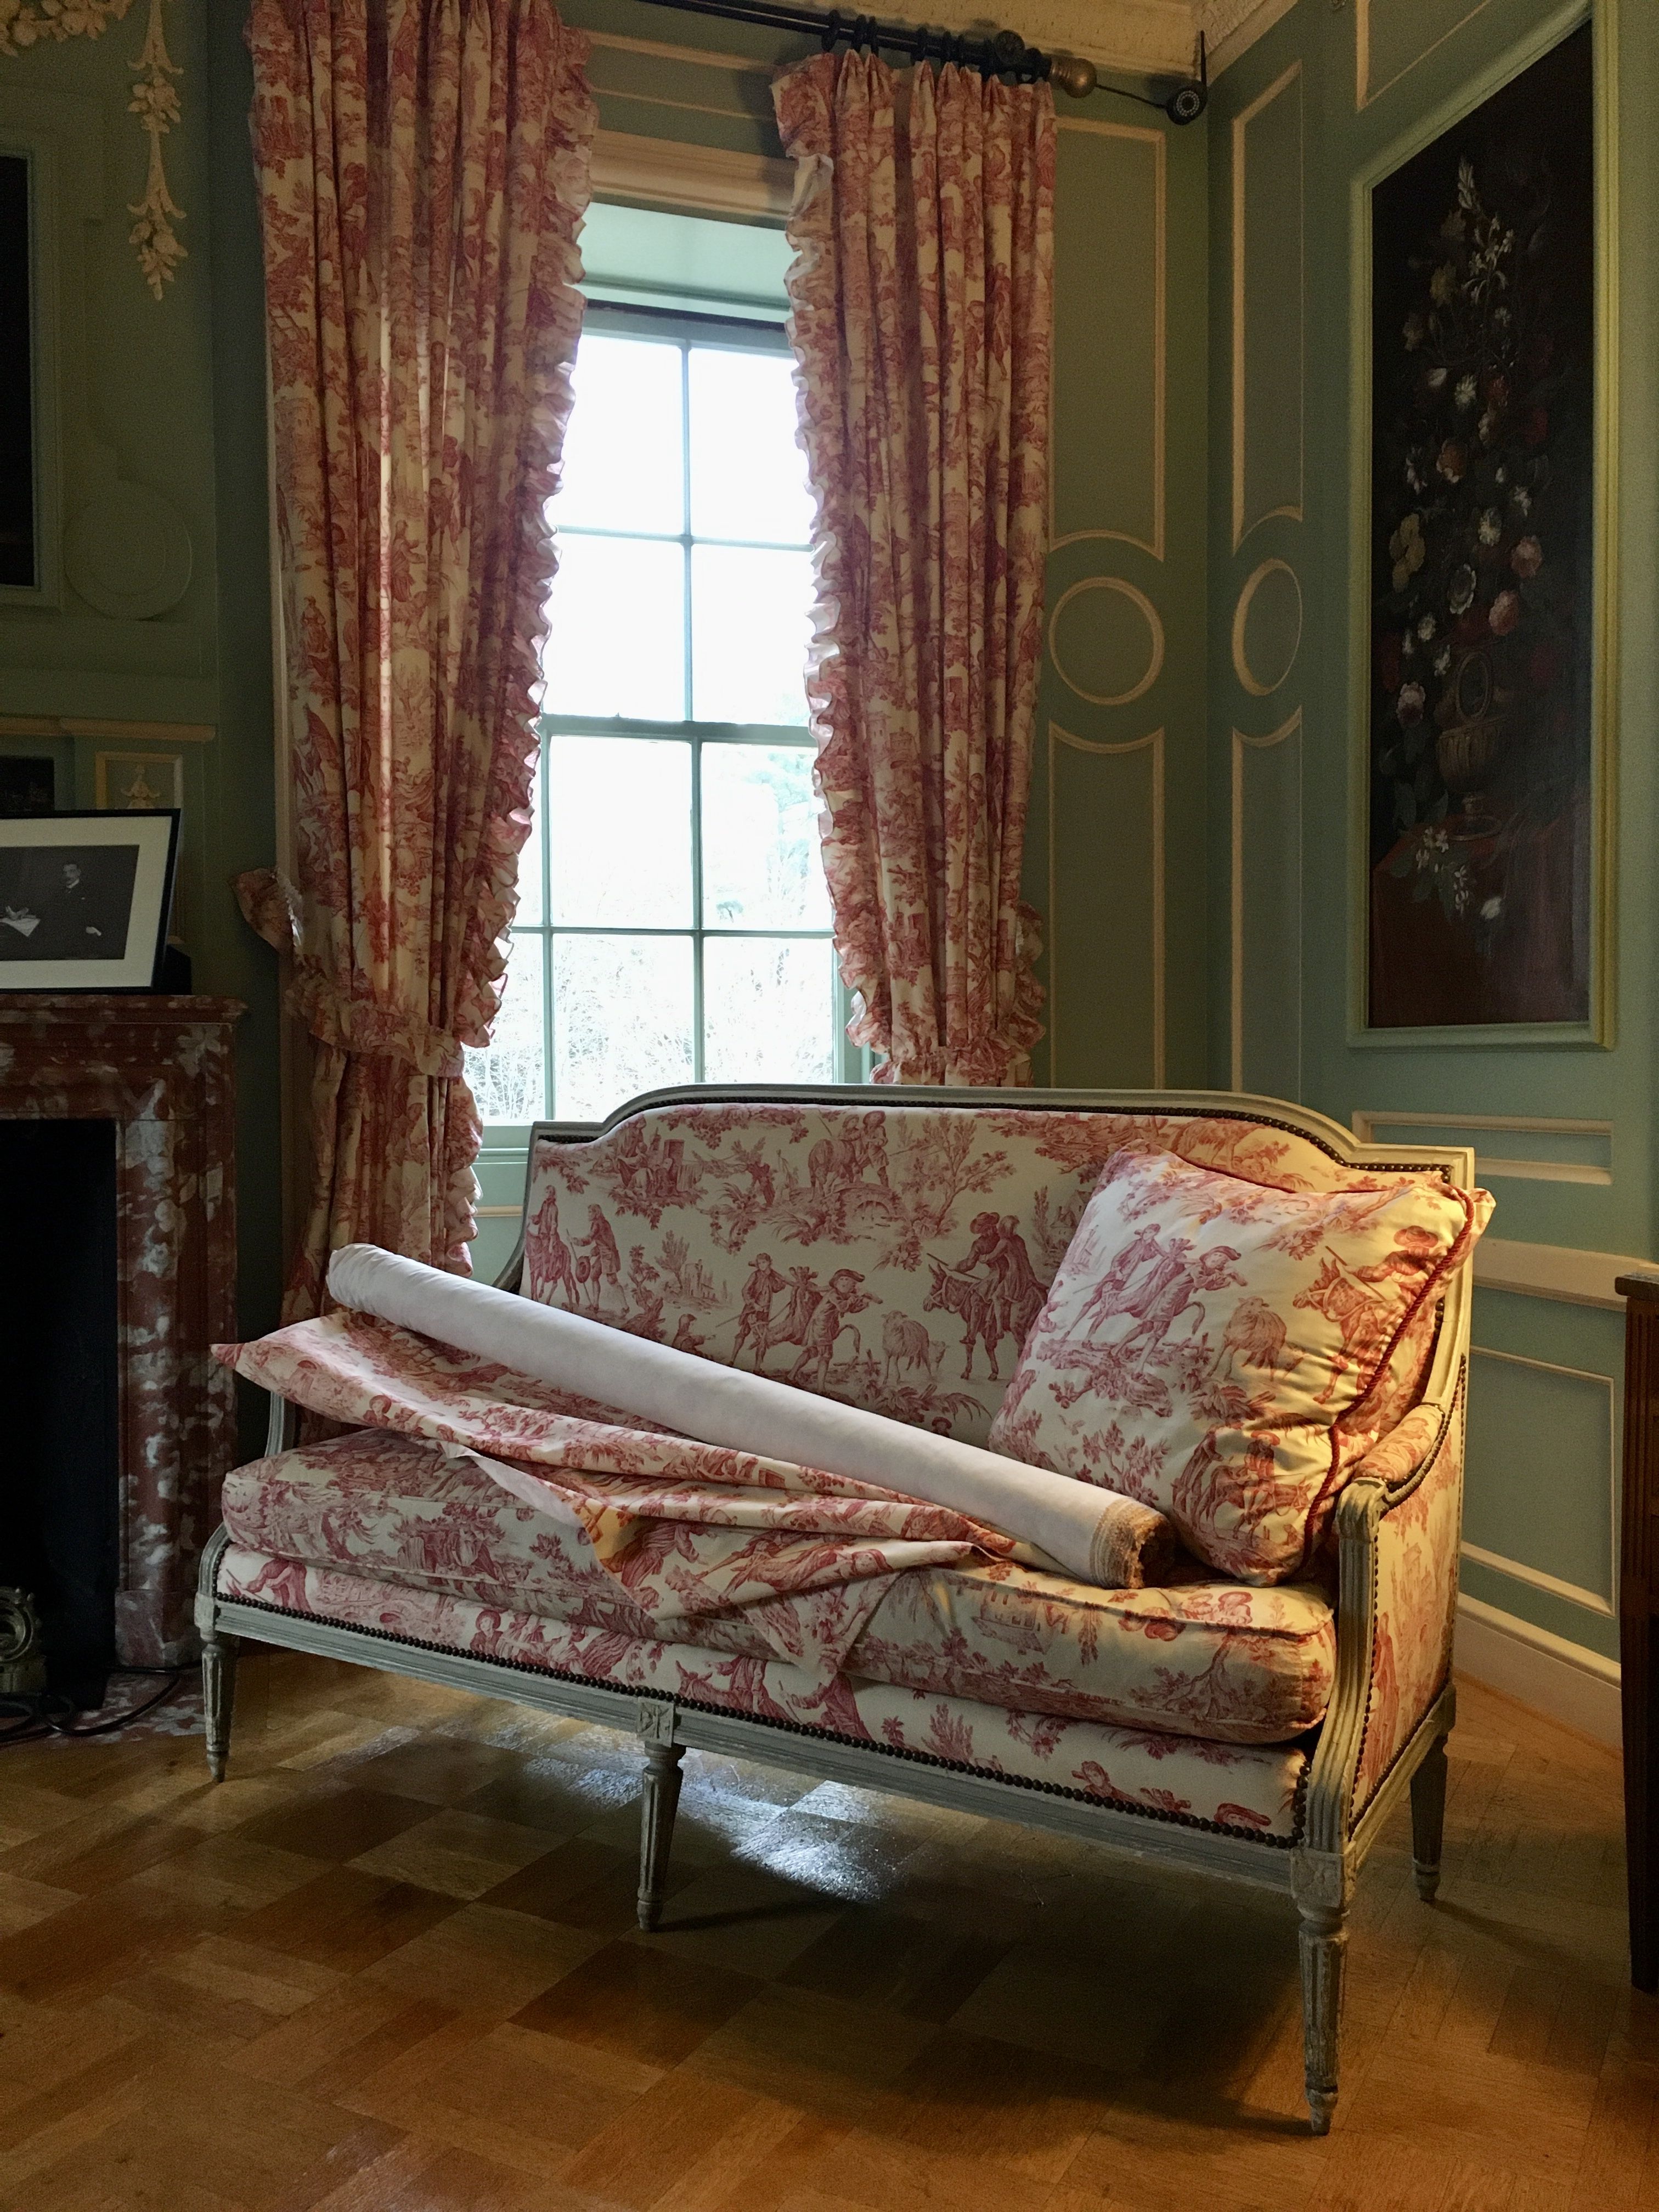 toile de jouy and a winner - MY FRENCH COUNTRY HOME